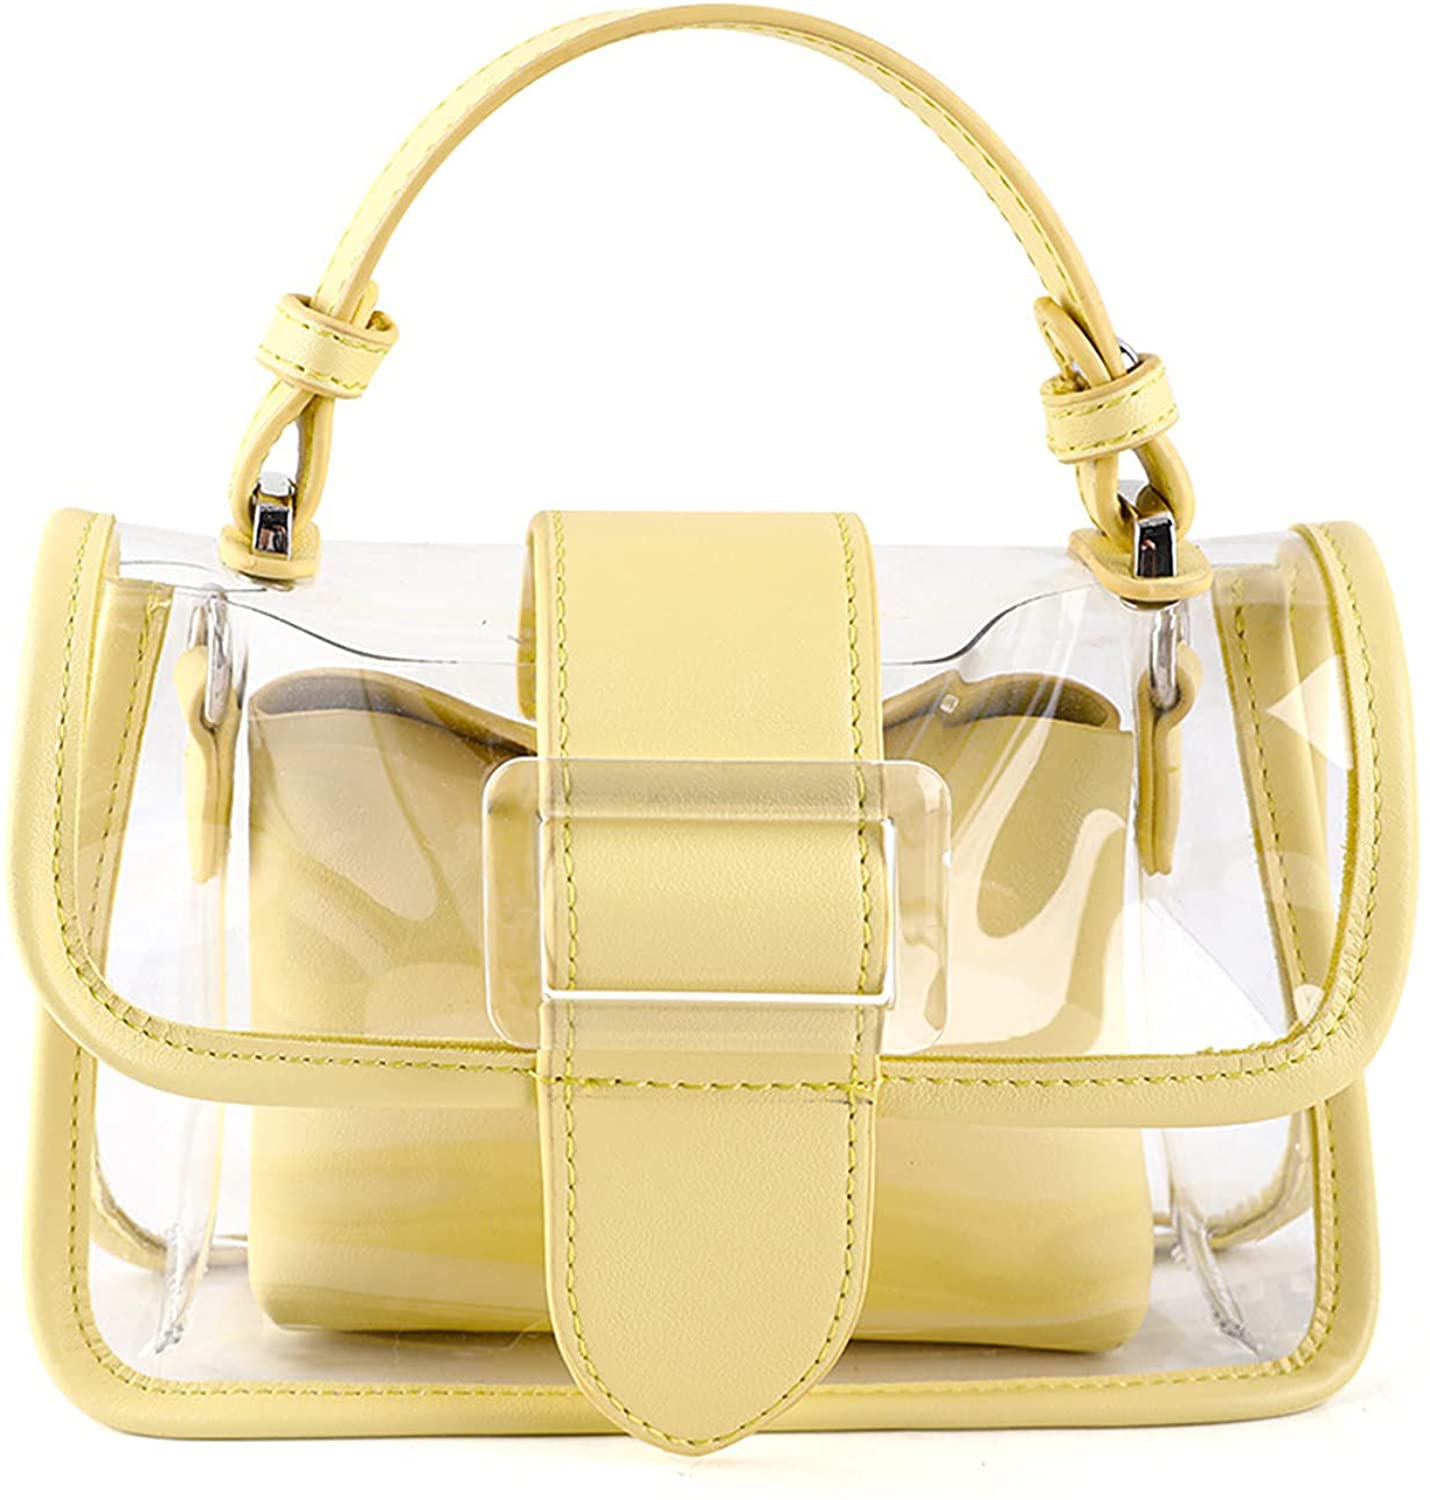 Chain Strap Grid Quilted Crossbody Bag - MES 0203 - Light Yellow | VASCARA